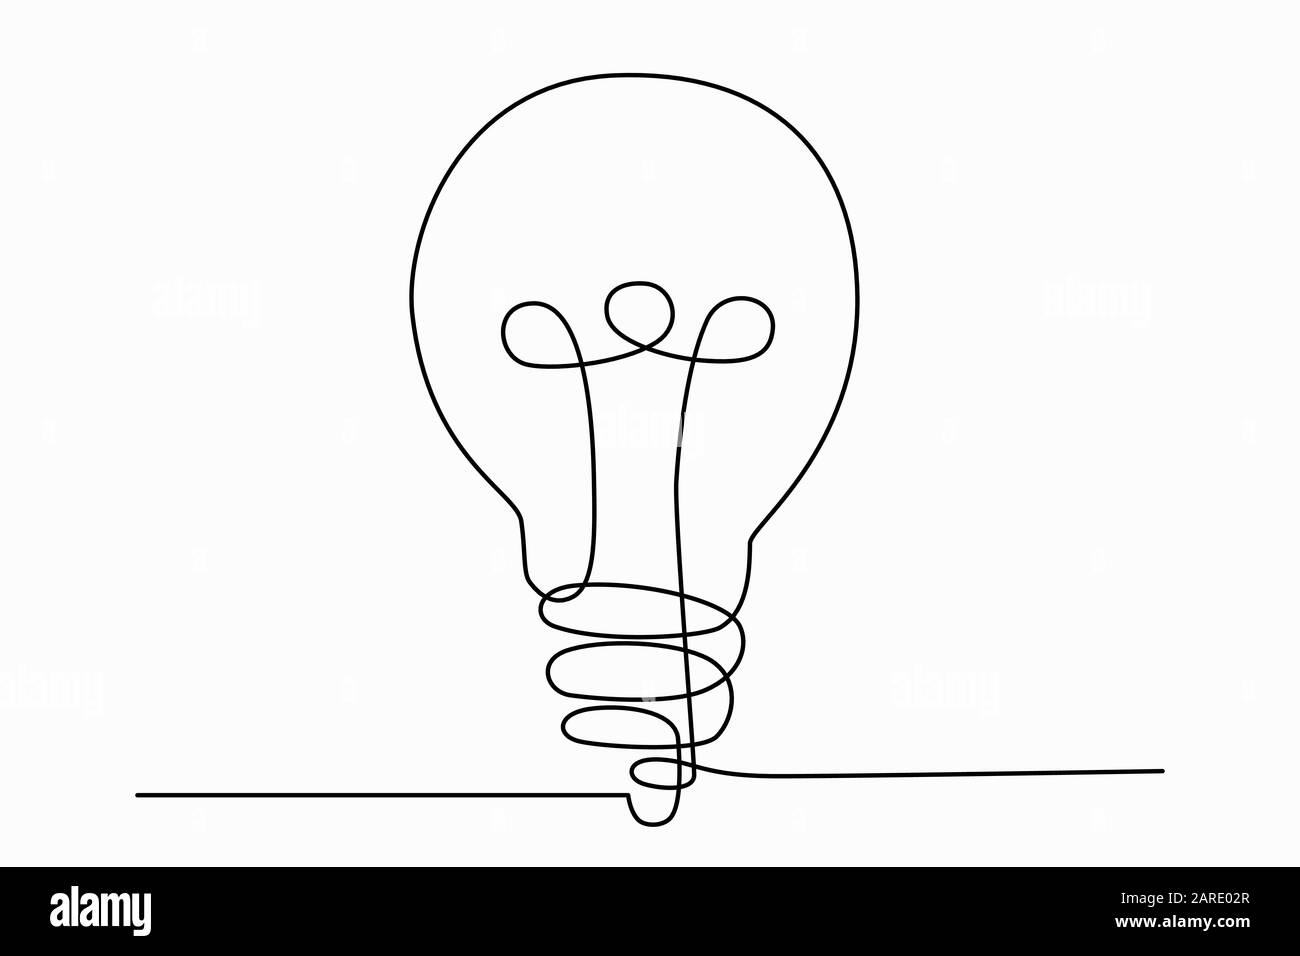 Continuous one line art drawing of idea (light bulb). Concept of idea emergence. Vector illustration. Stock Vector